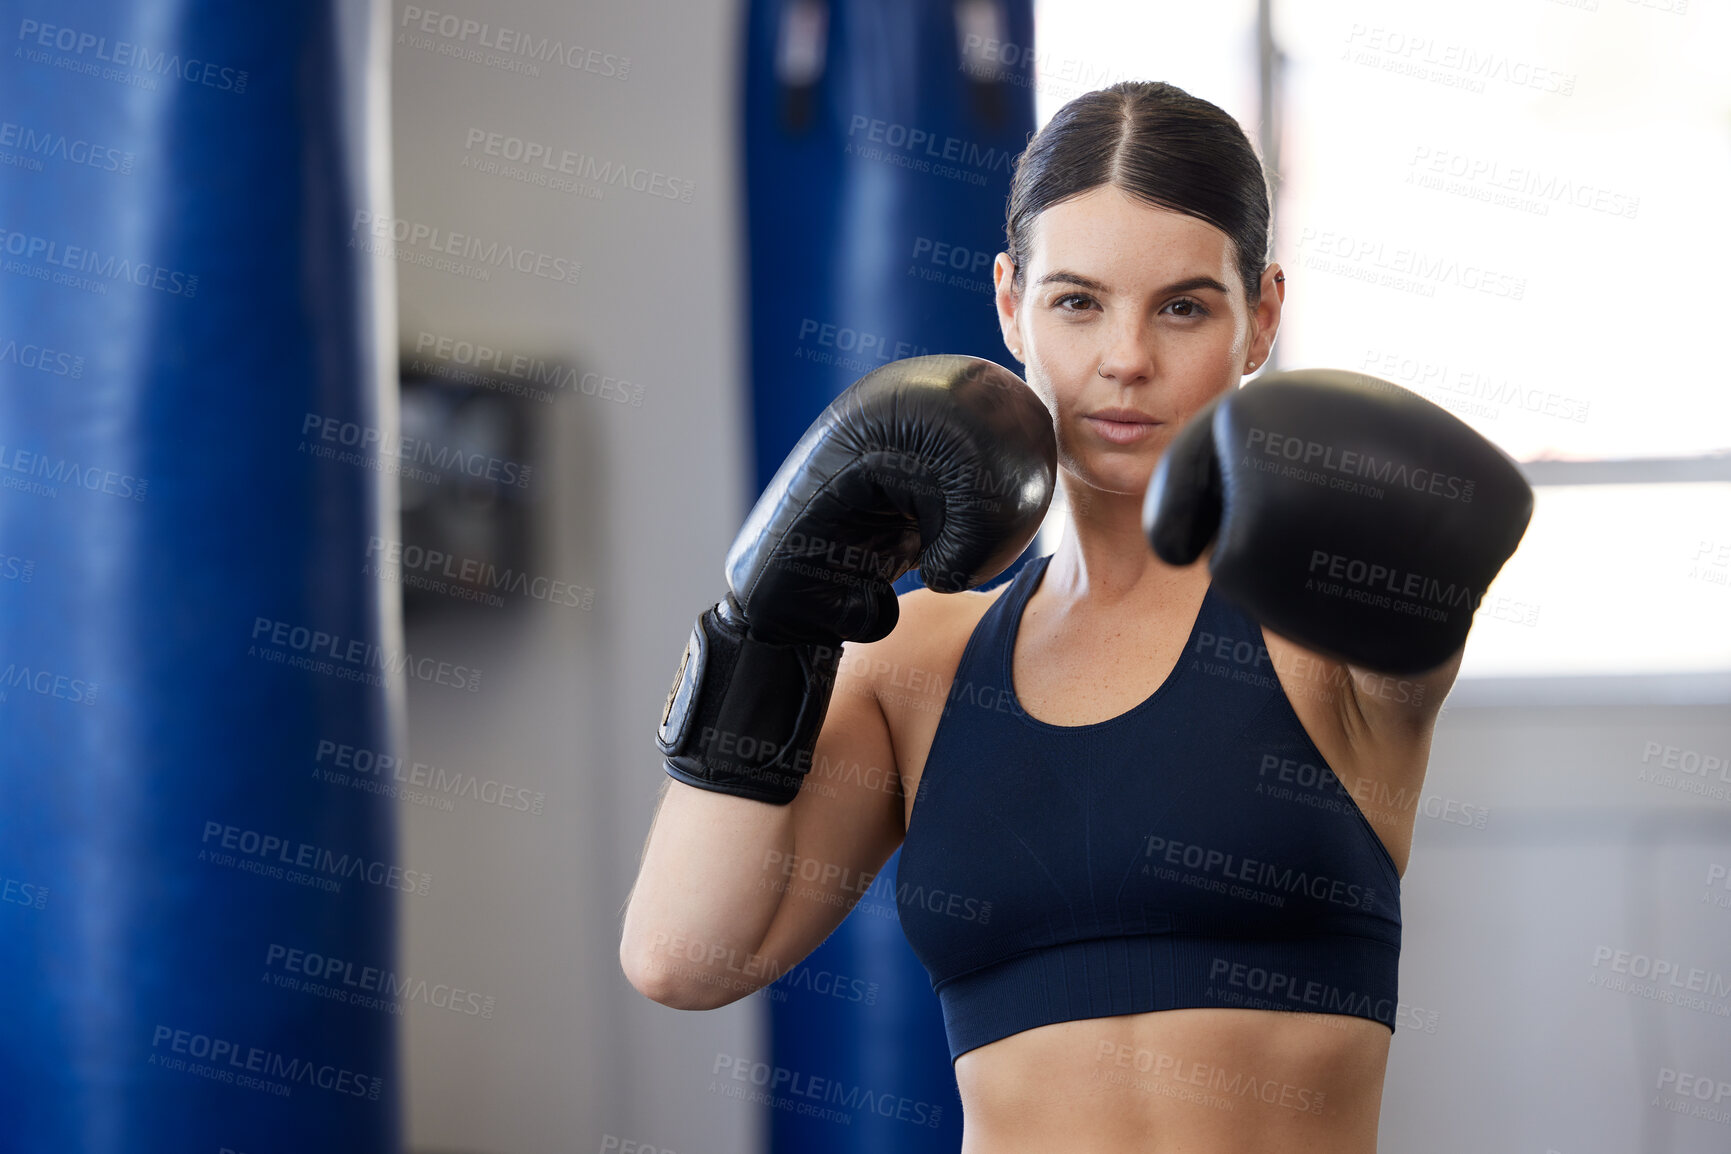 Buy stock photo Fitness, kickboxing and portrait of woman athlete doing a cardio workout while training for a match. Sports, exercise and female boxer getting ready for a fight in sport, wellness and health gym.